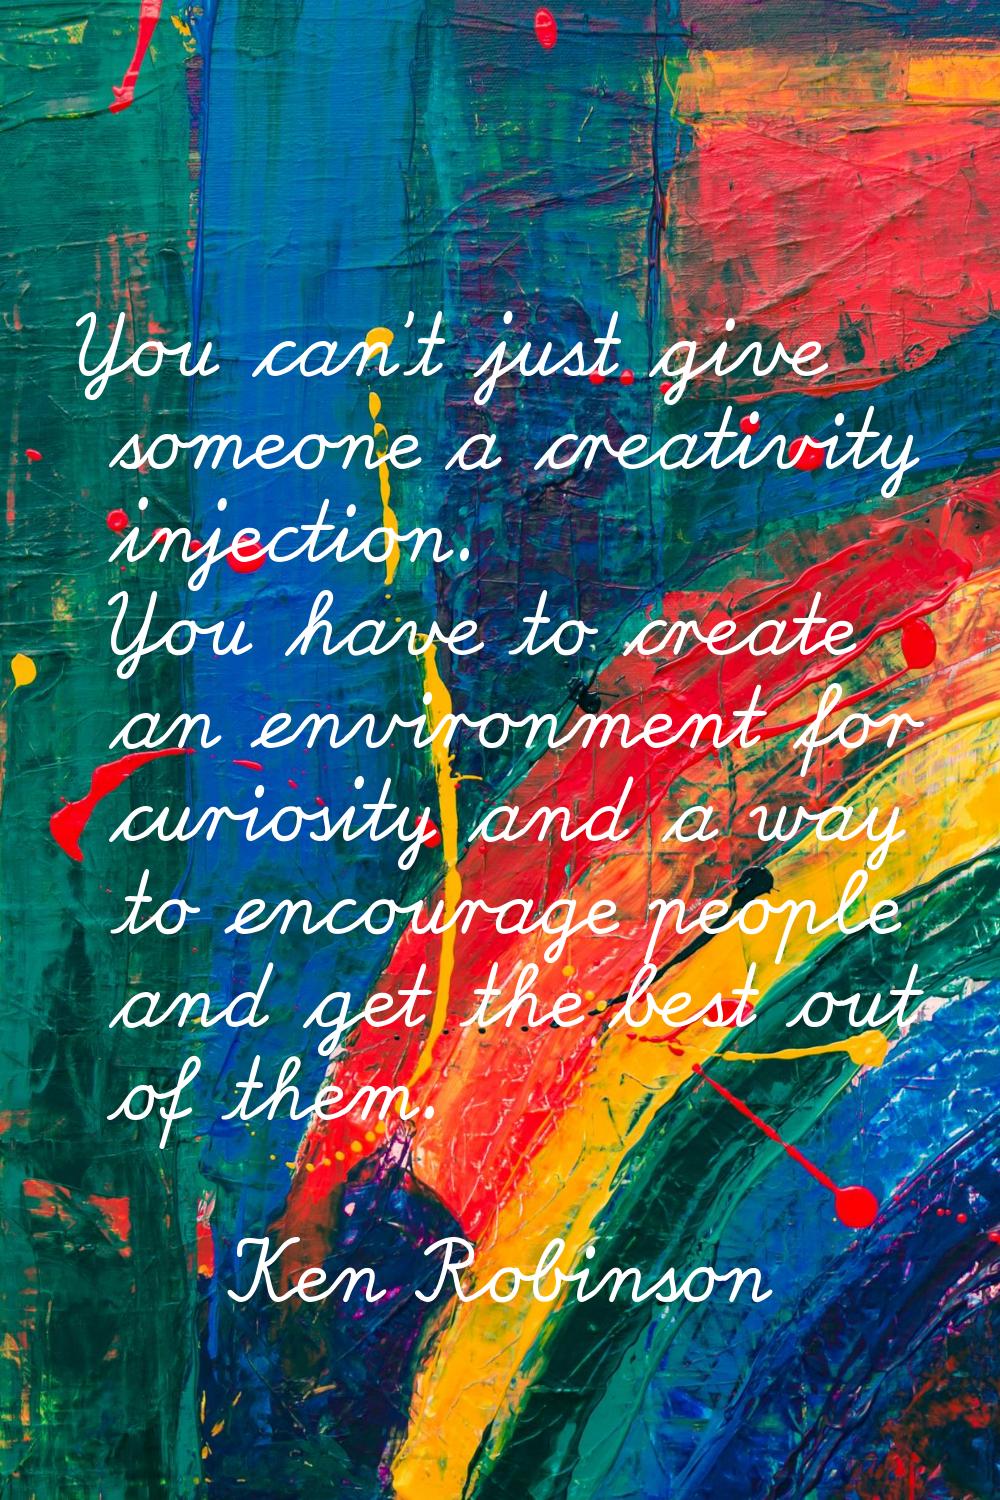 You can't just give someone a creativity injection. You have to create an environment for curiosity